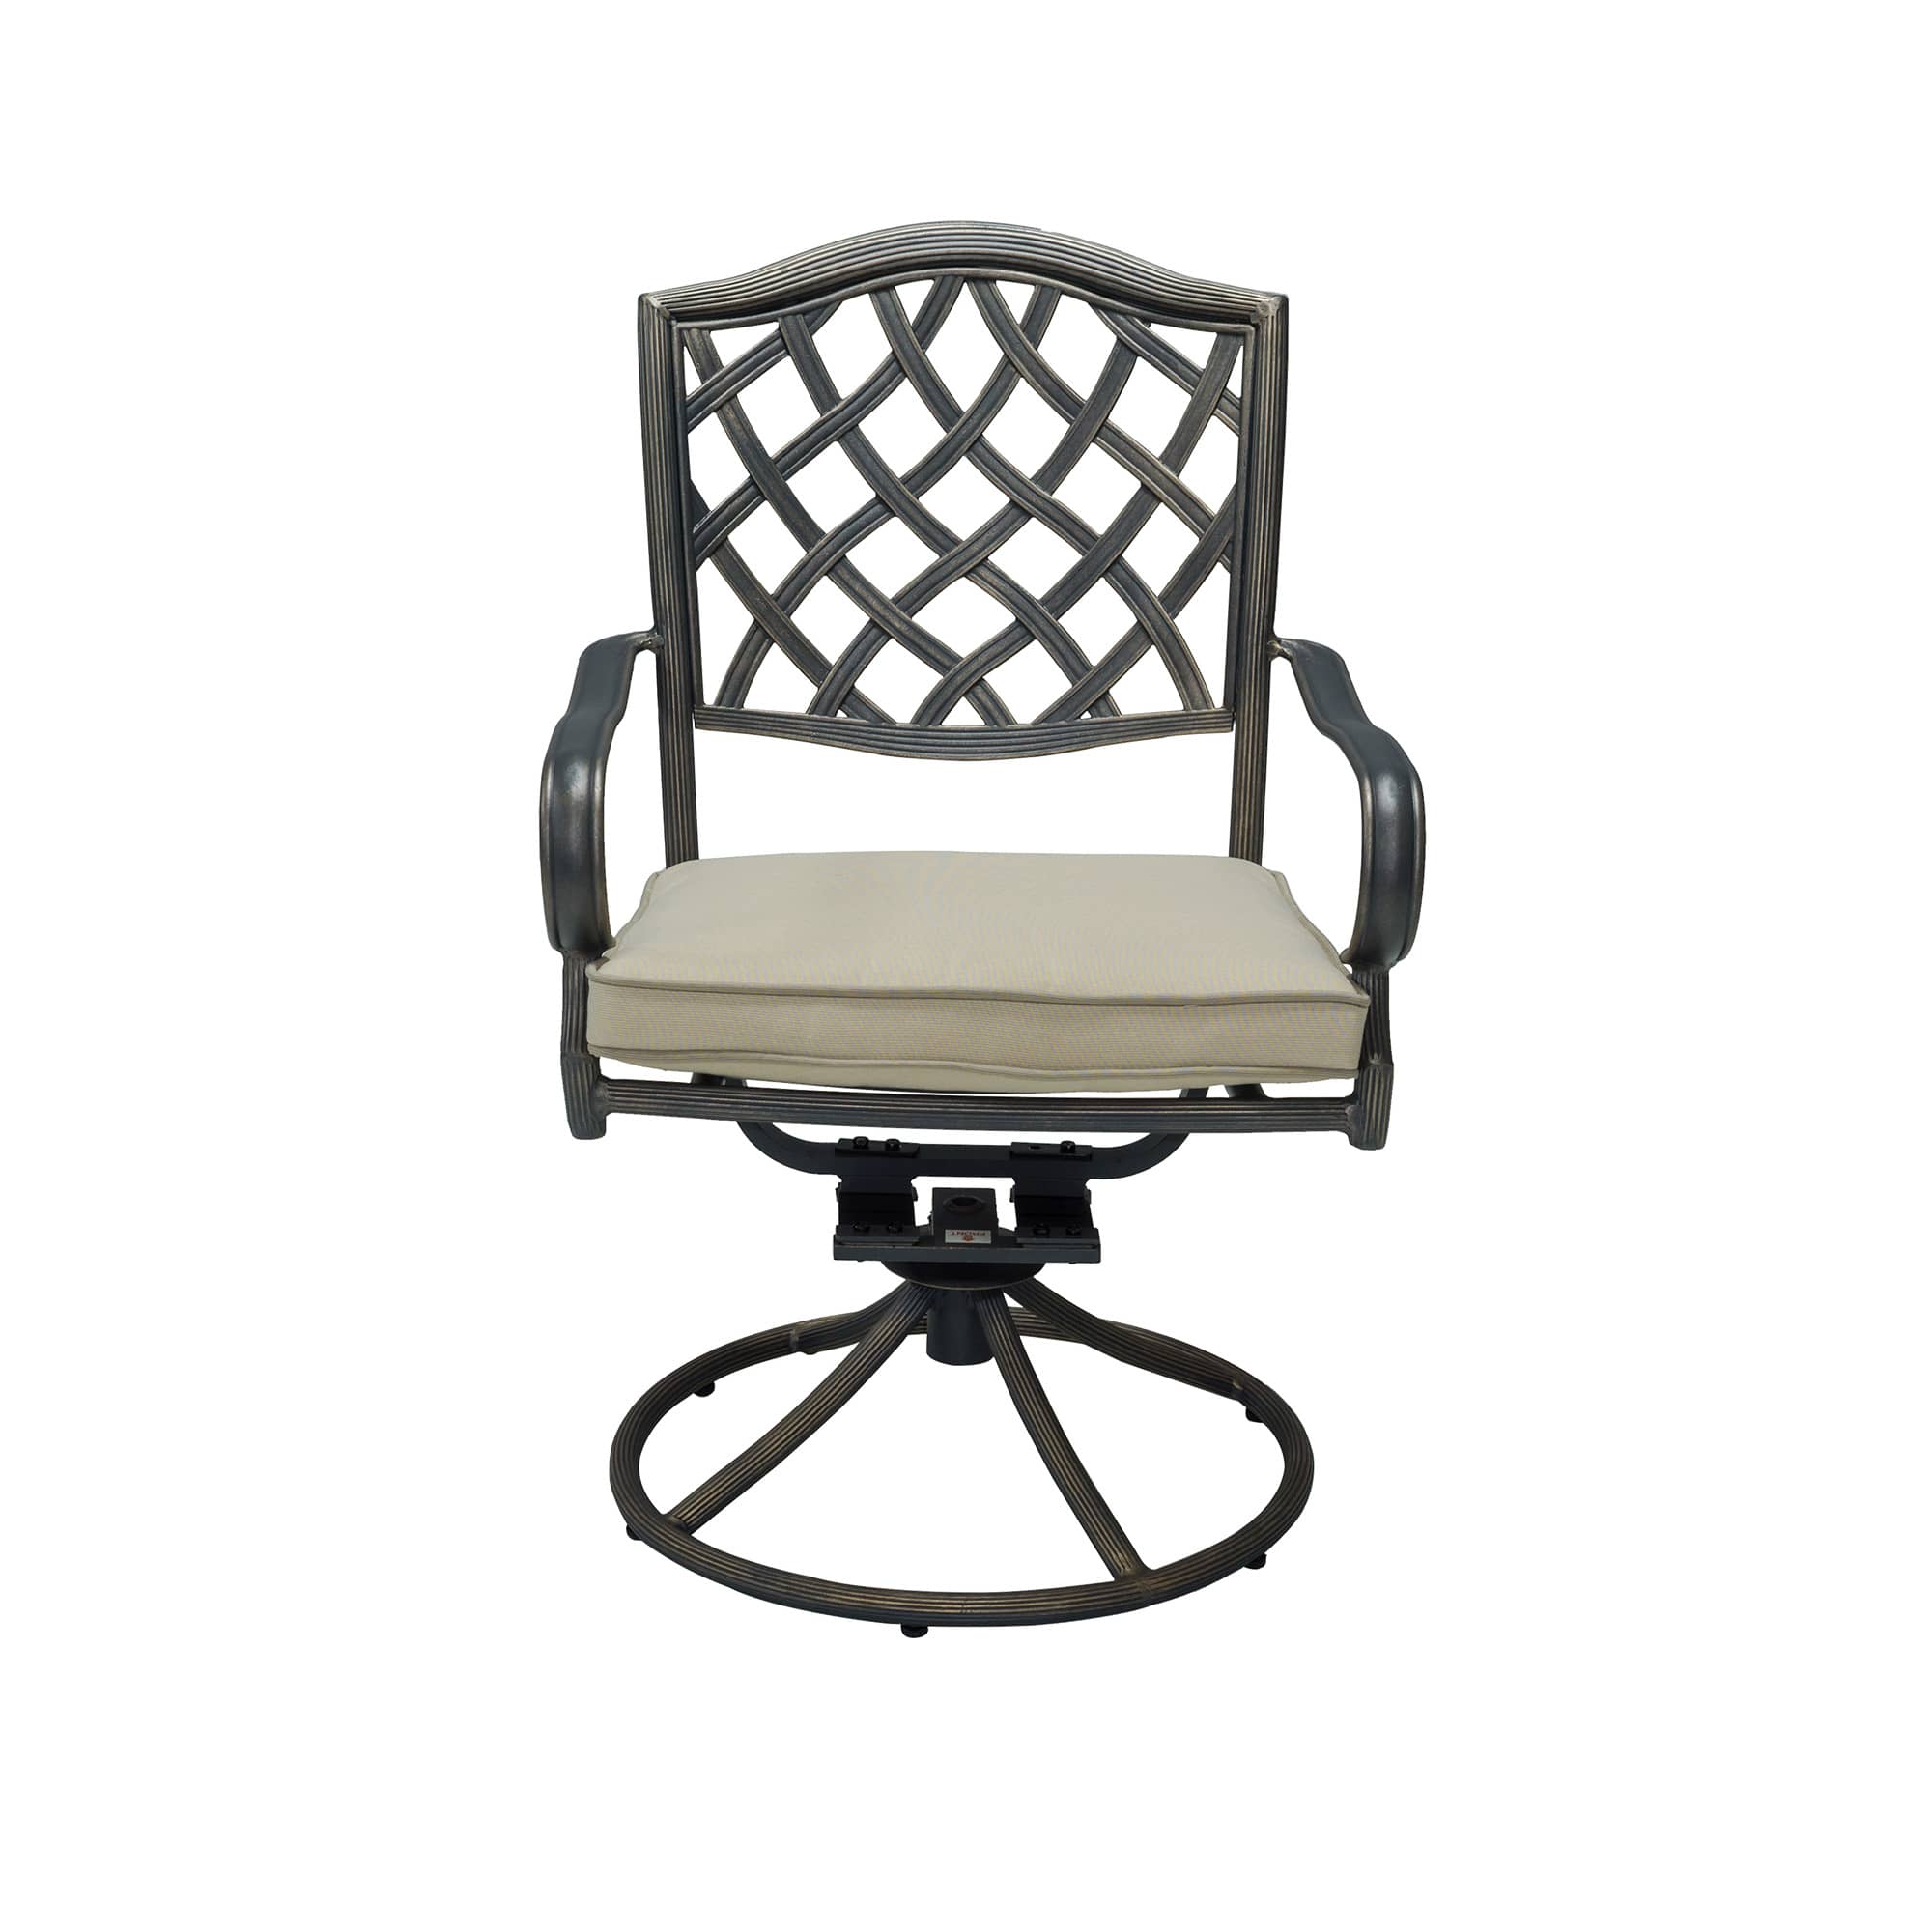 CASAINC 2-Piece Brown Cast Aluminum Outdoor Swivel Dining Chair Patio Bistro Chairs with Cushion-Casainc Canada